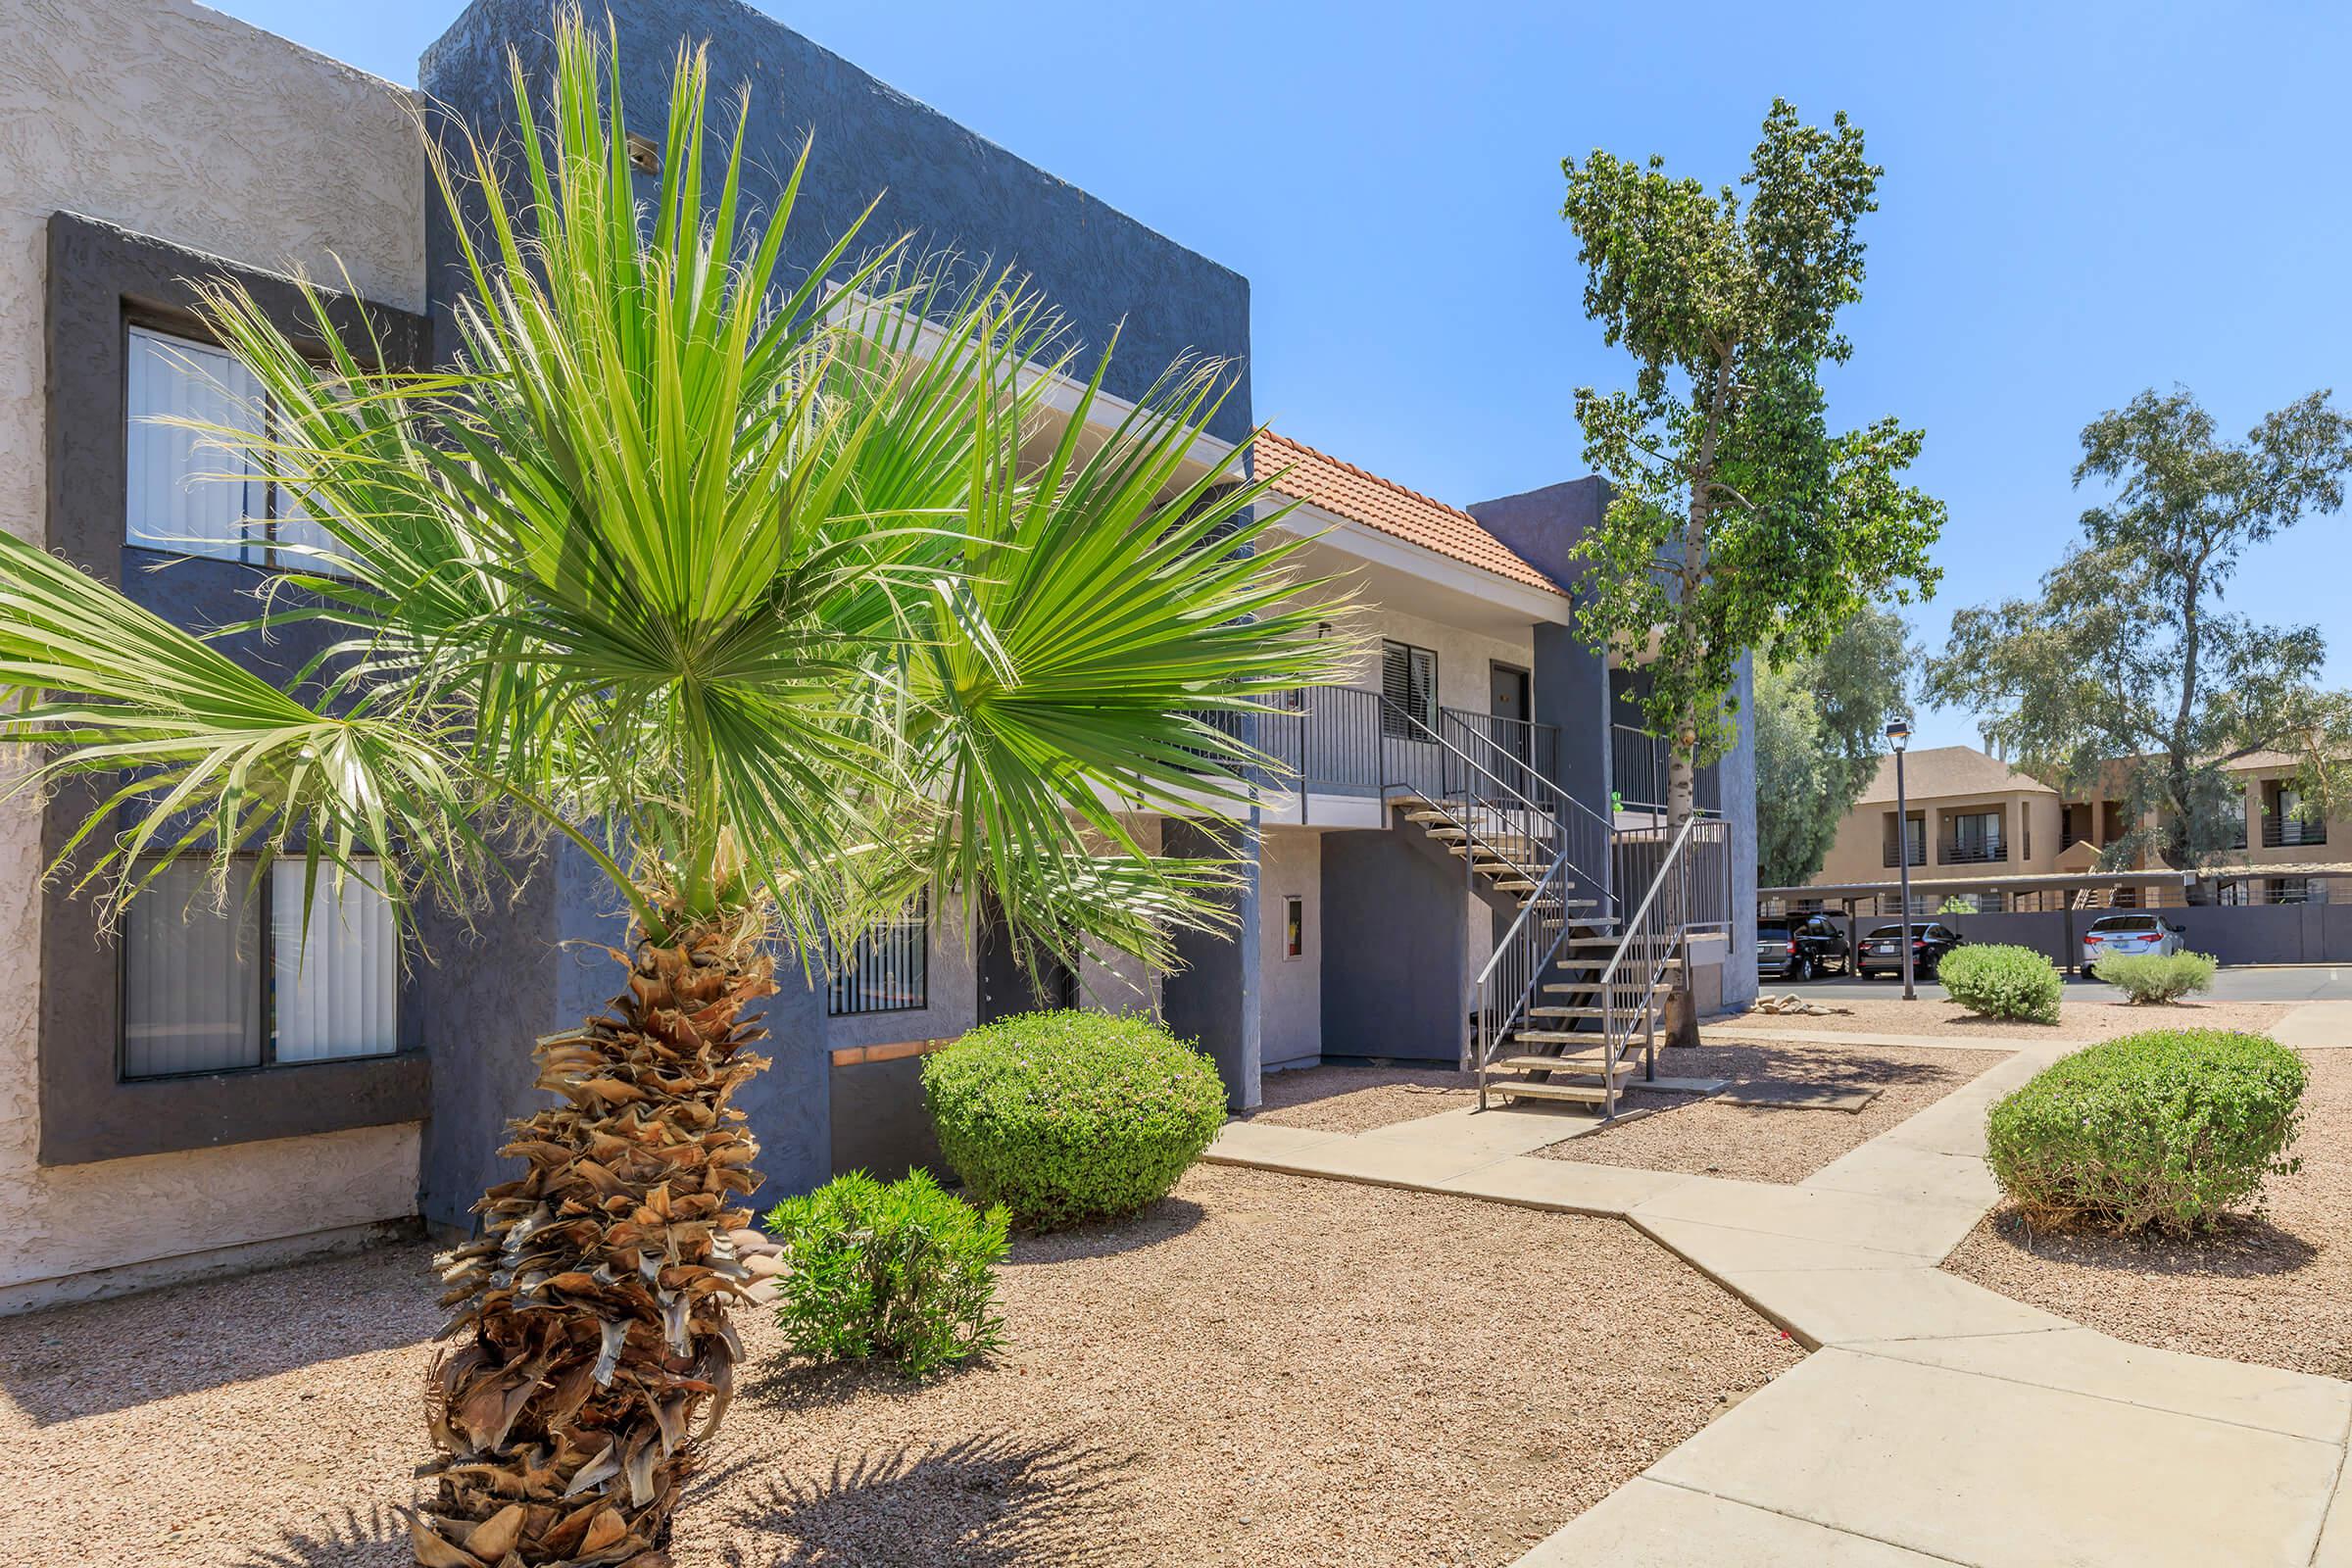 Outdoor pathways leading up to a large  two-story Phoenix apartment building with palm tree in the foreground